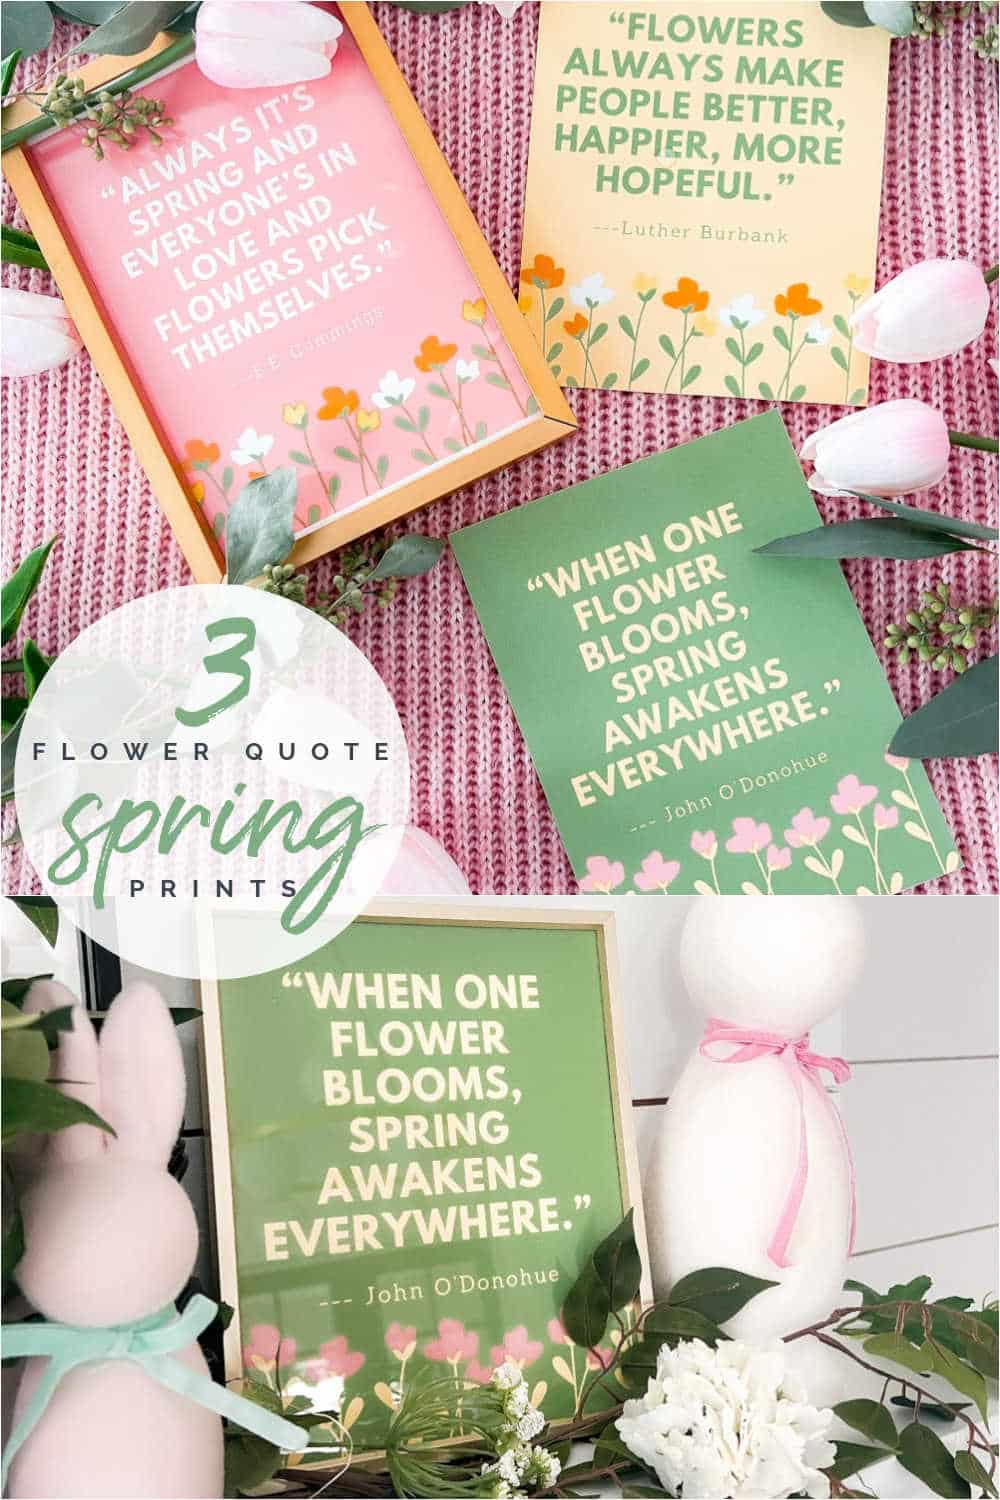 Three Free Spring Flower Prints. Add easy spring decor these Spring printables, printing tips, and hop-over to grab more delightful prints from my creative friends.